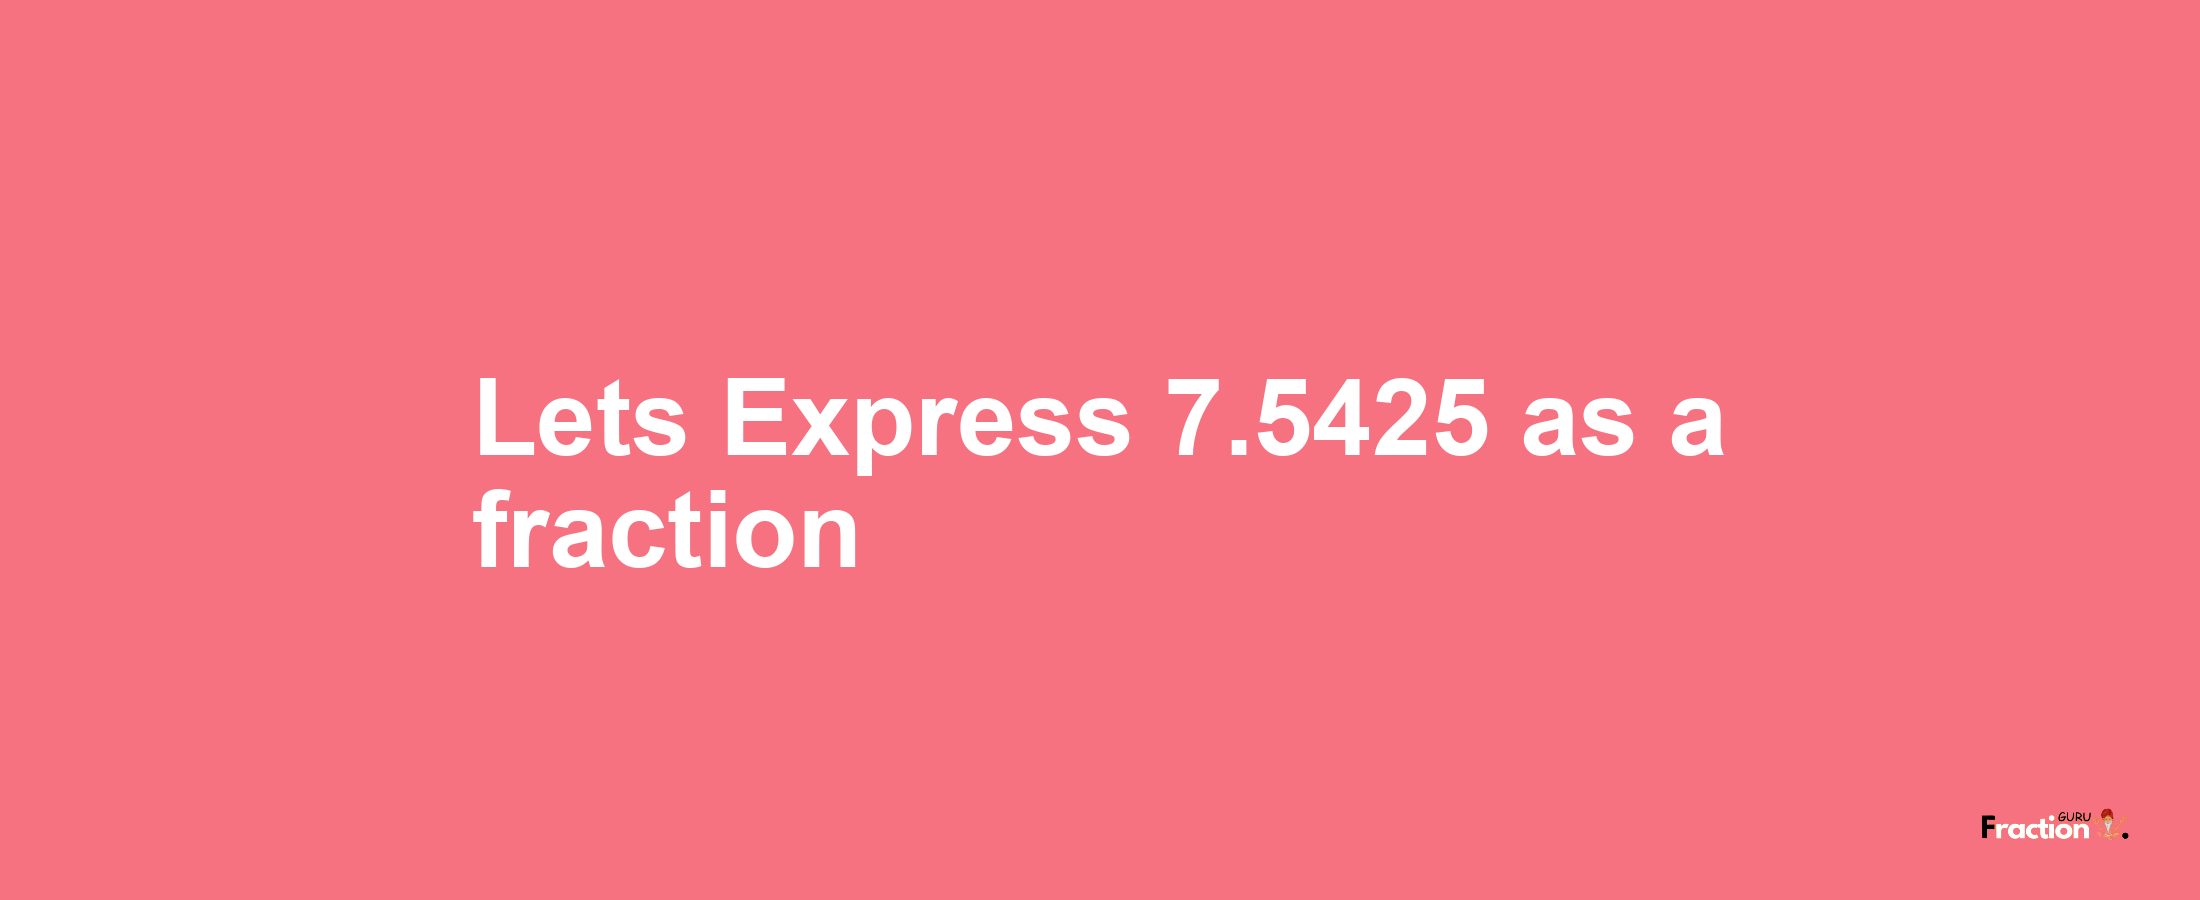 Lets Express 7.5425 as afraction